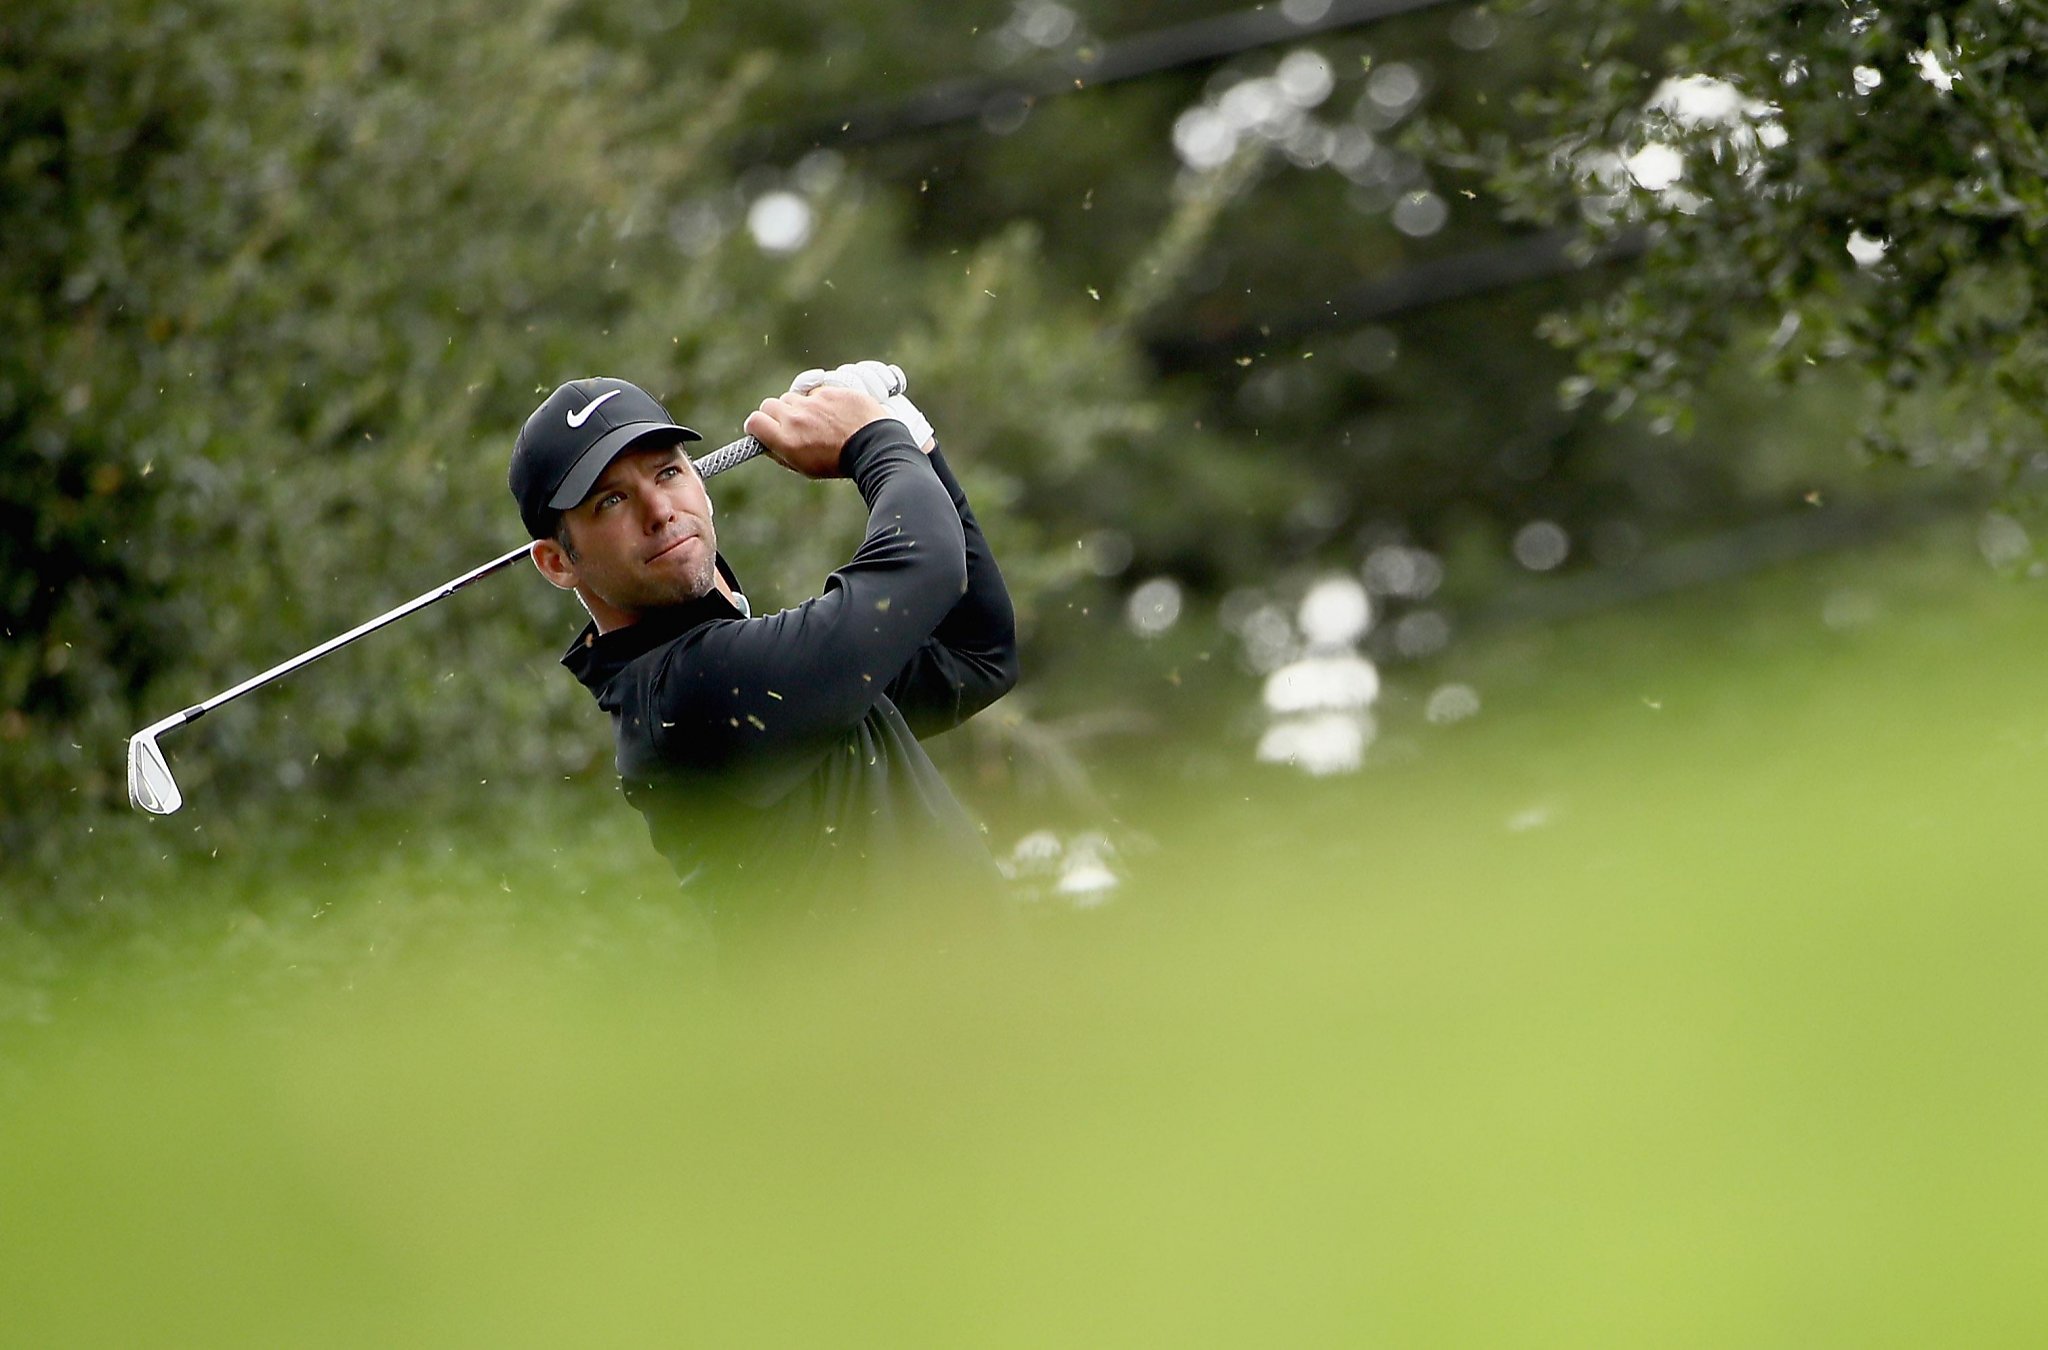 Phil Mickelson, Paul Casey hunt elusive victory - SFGate